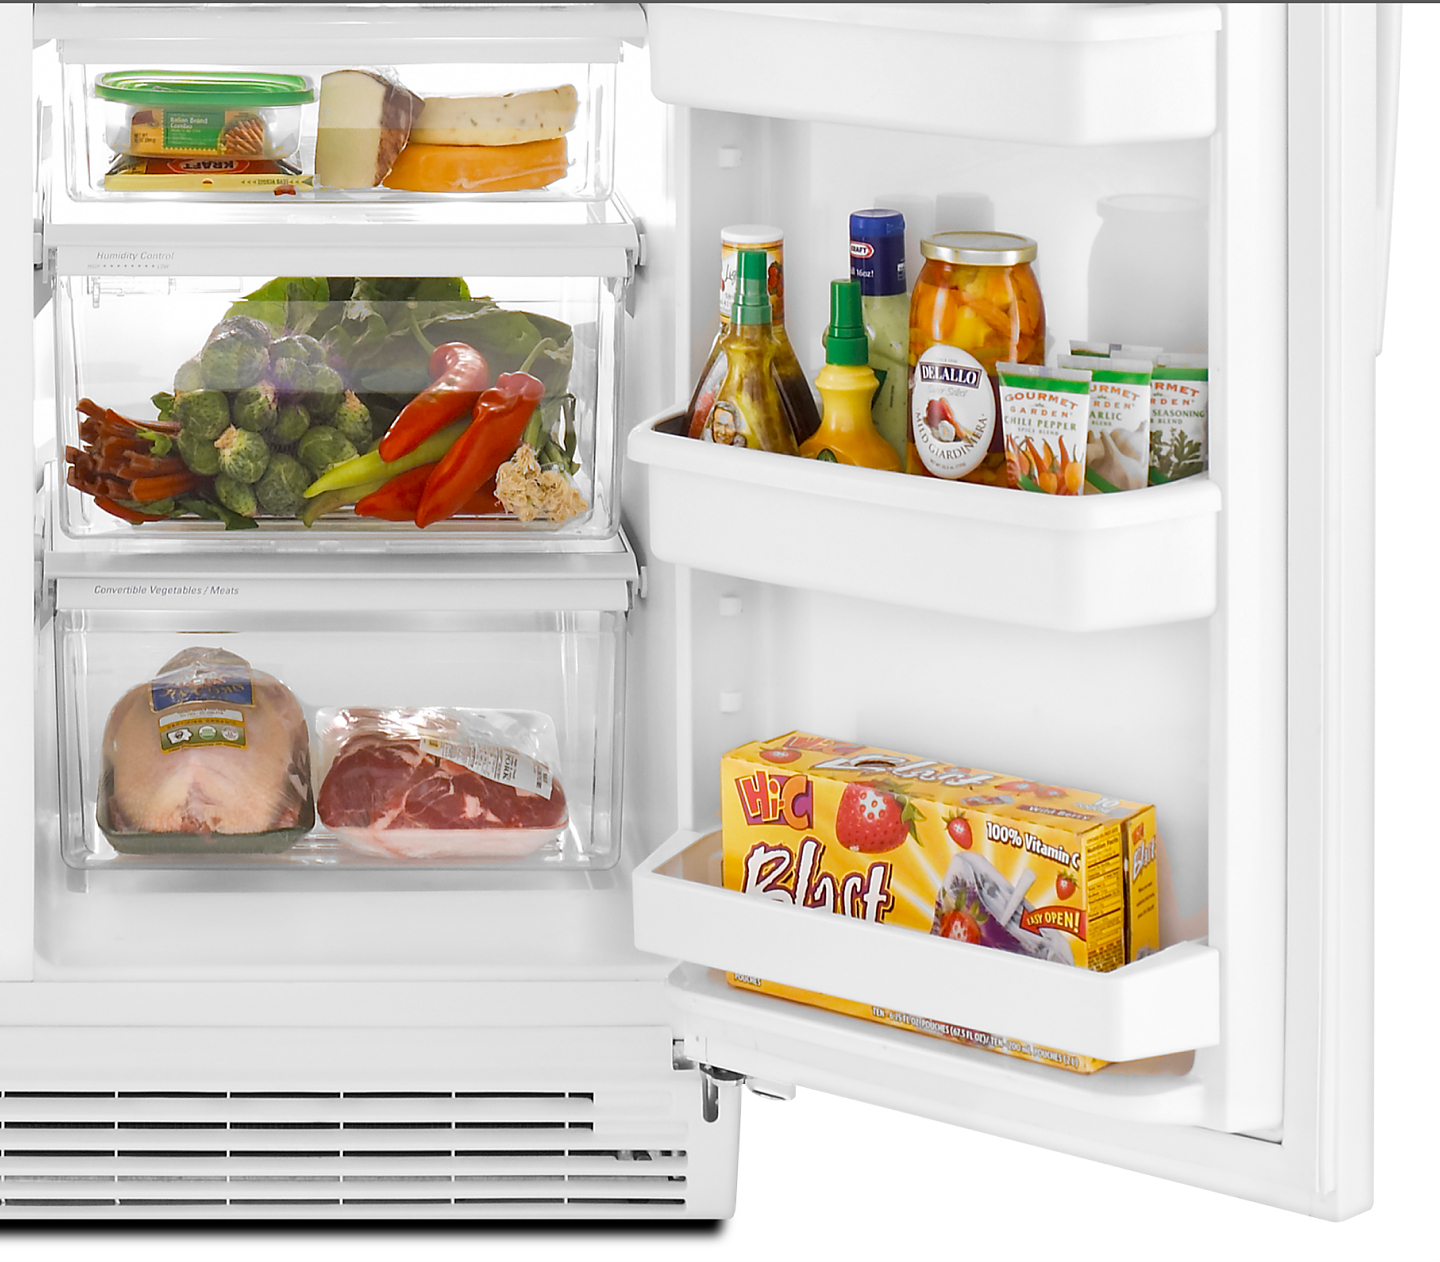 https://kitchenaid-h.assetsadobe.com/is/image/content/dam/business-unit/whirlpoolv2/en-us/marketing-content/site-assets/page-content/oc-articles/how-to-organize-a-refrigerator/How_to_Organize_a_Refer_Image%207_v2.jpg?fmt=png-alpha&qlt=85,0&resMode=sharp2&op_usm=1.75,0.3,2,0&scl=1&constrain=fit,1